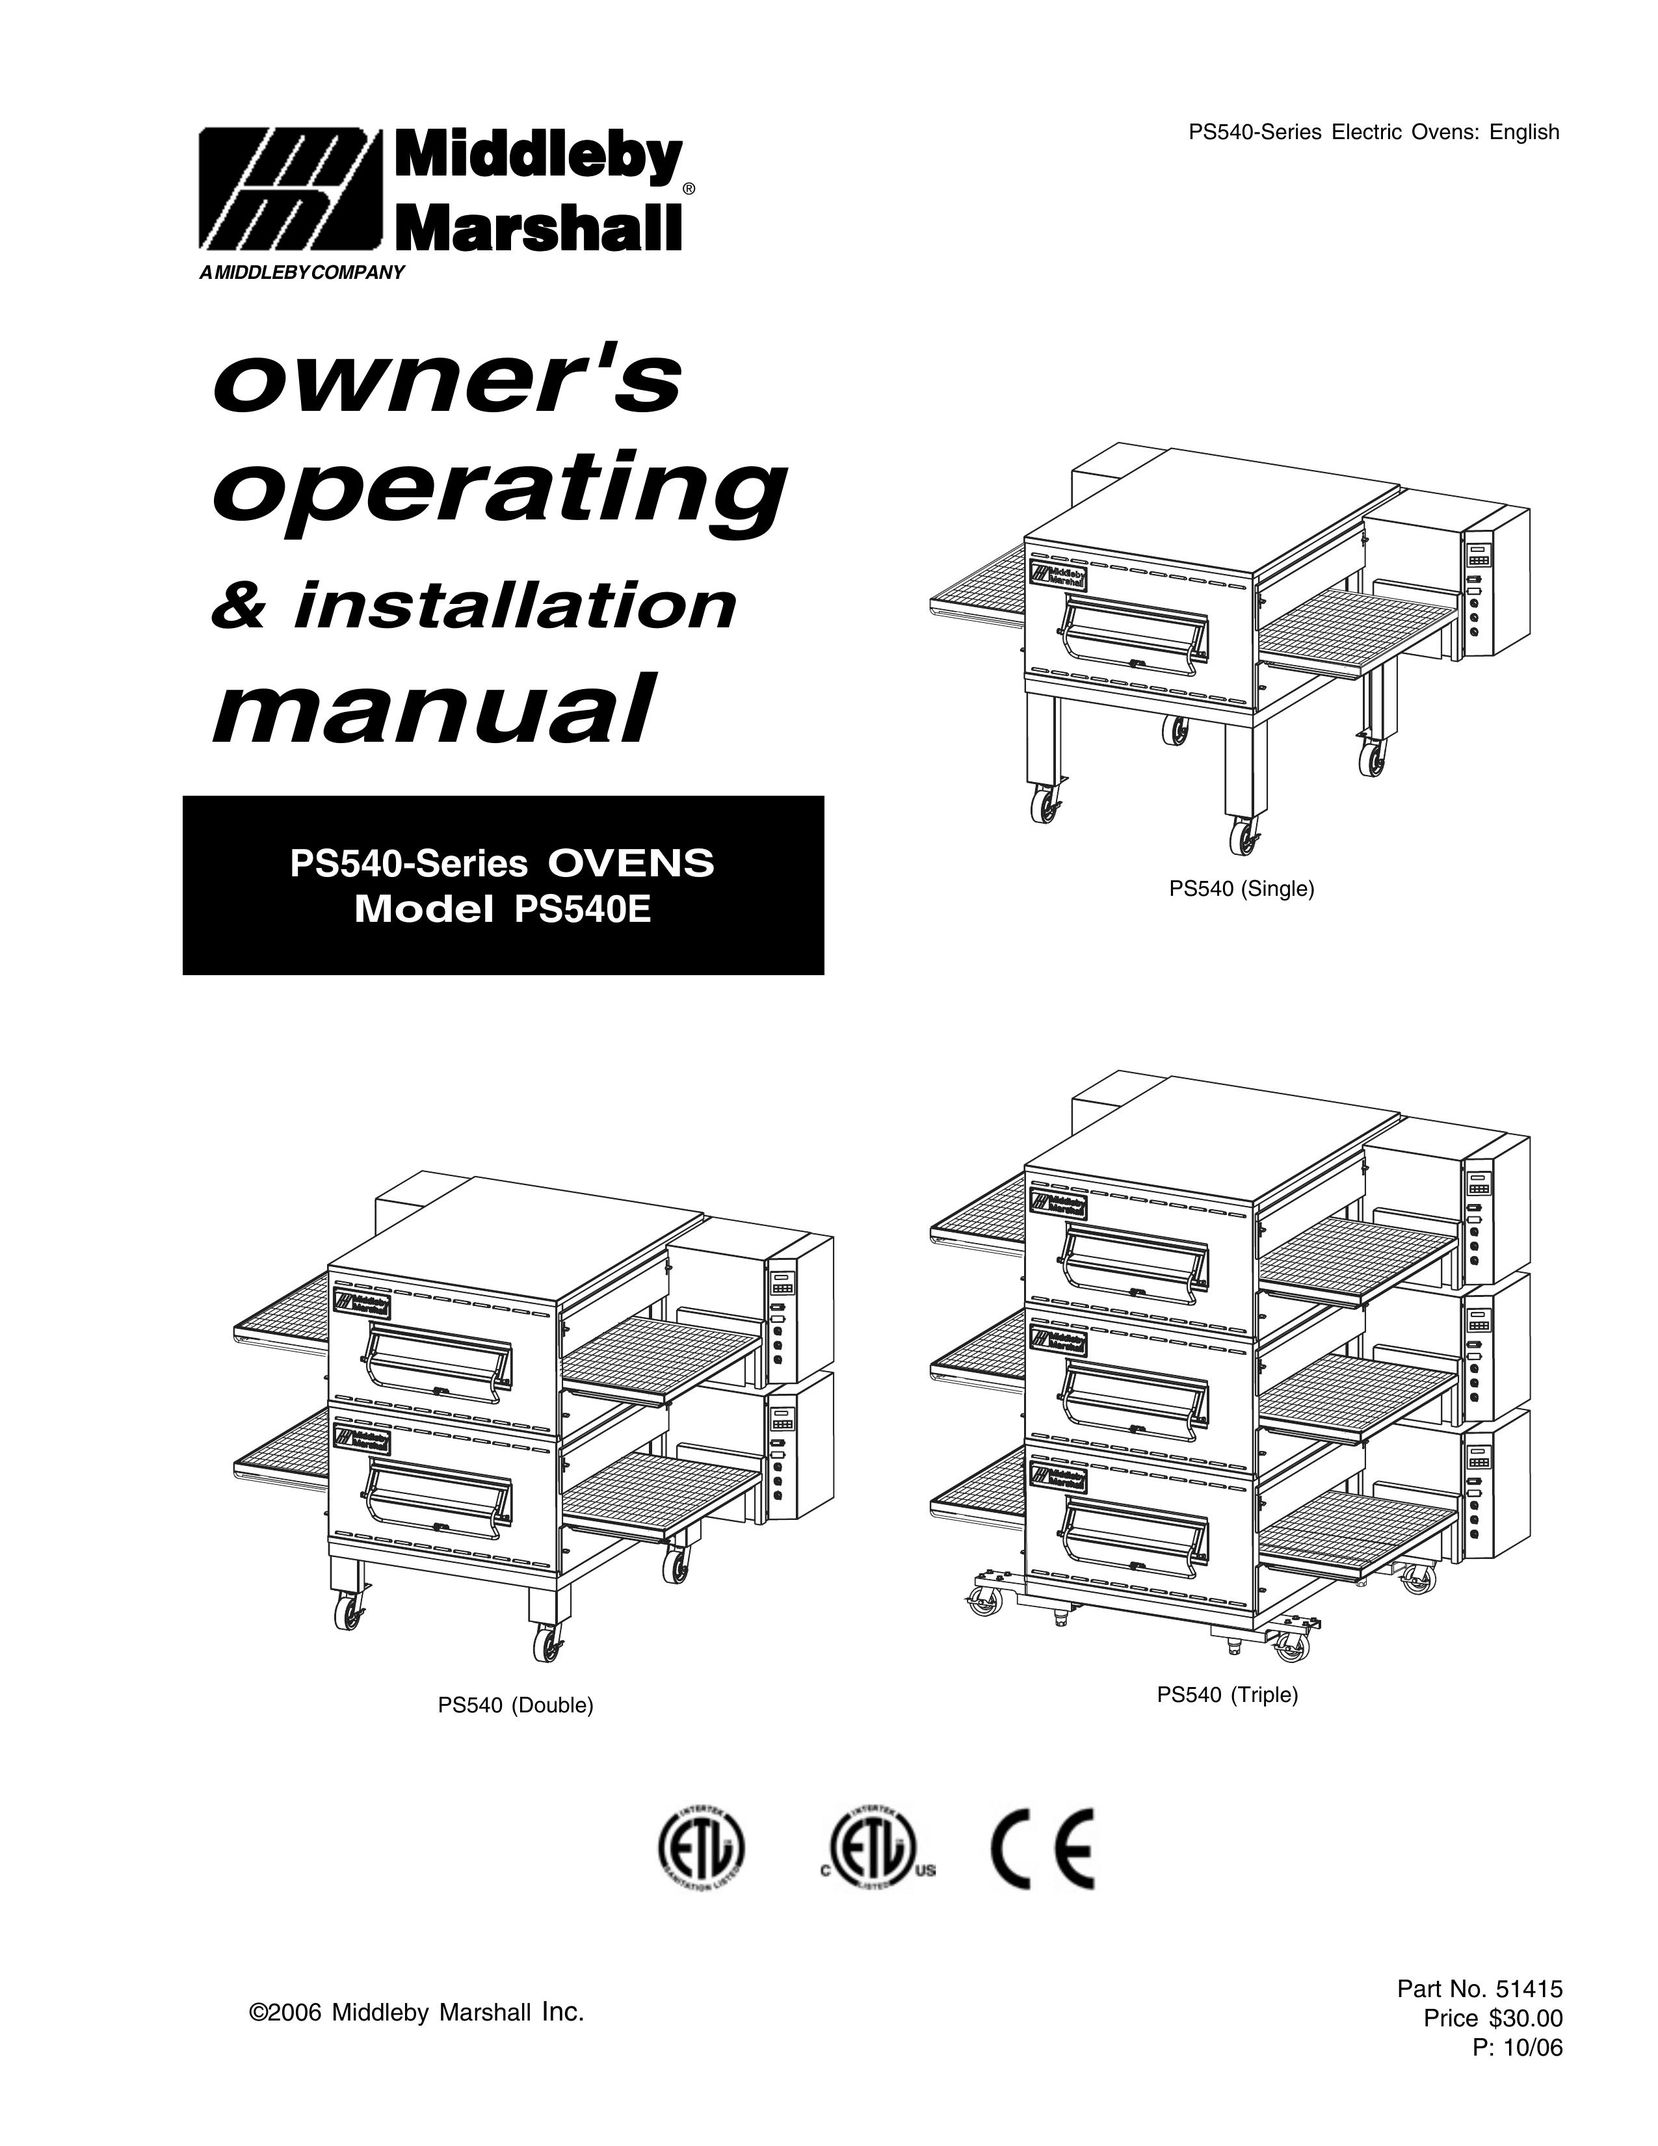 Middleby Marshall PS540 (Triple) Oven User Manual